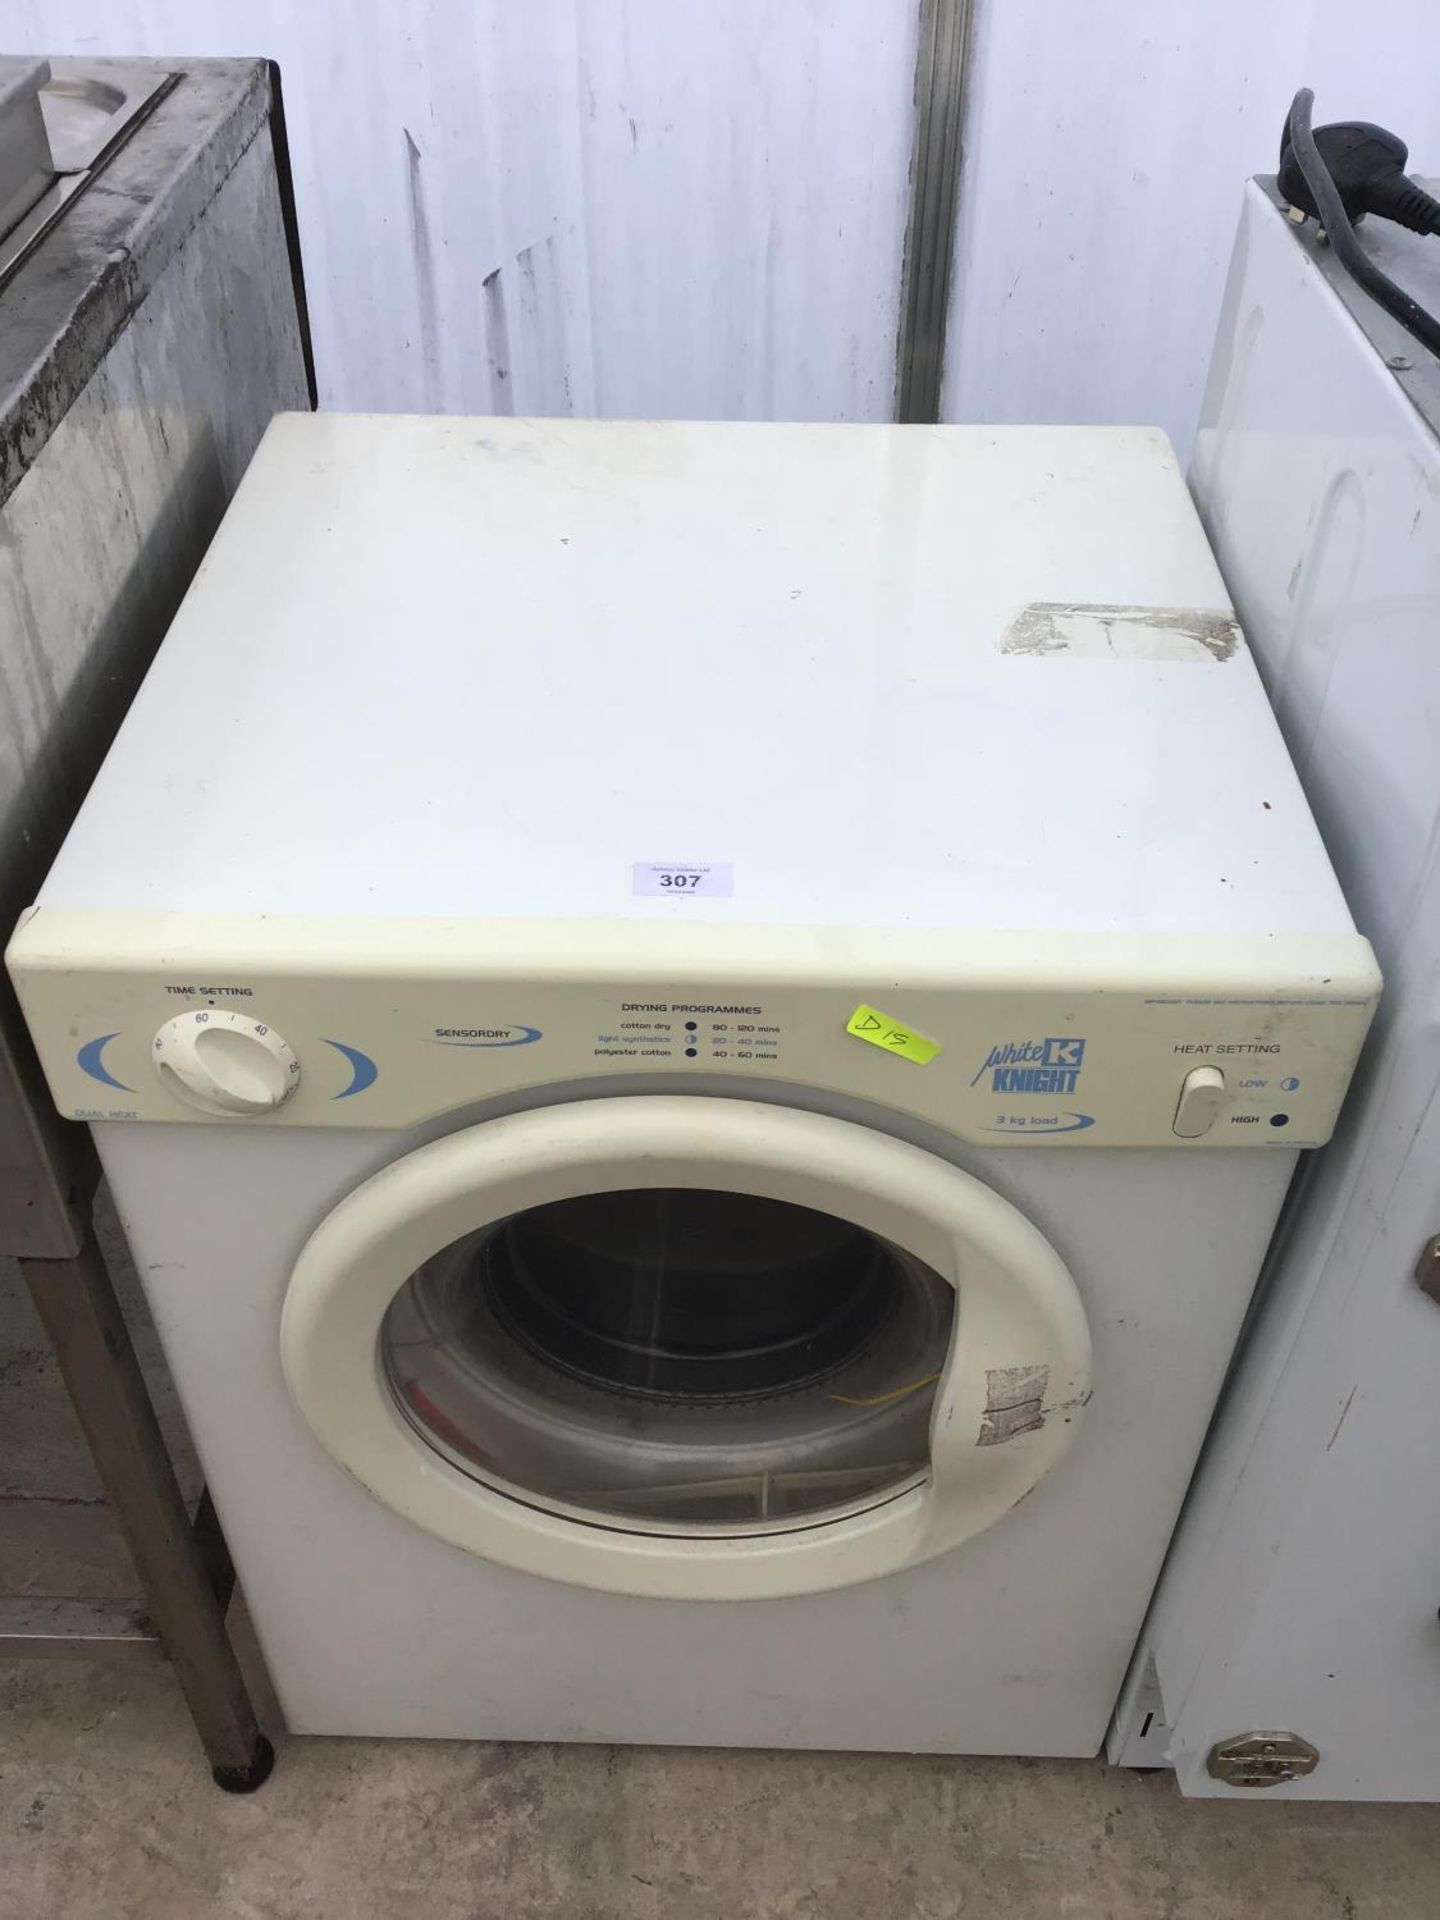 A WHITE KNIGHT 3KG DRIER IN WORKING ORDER